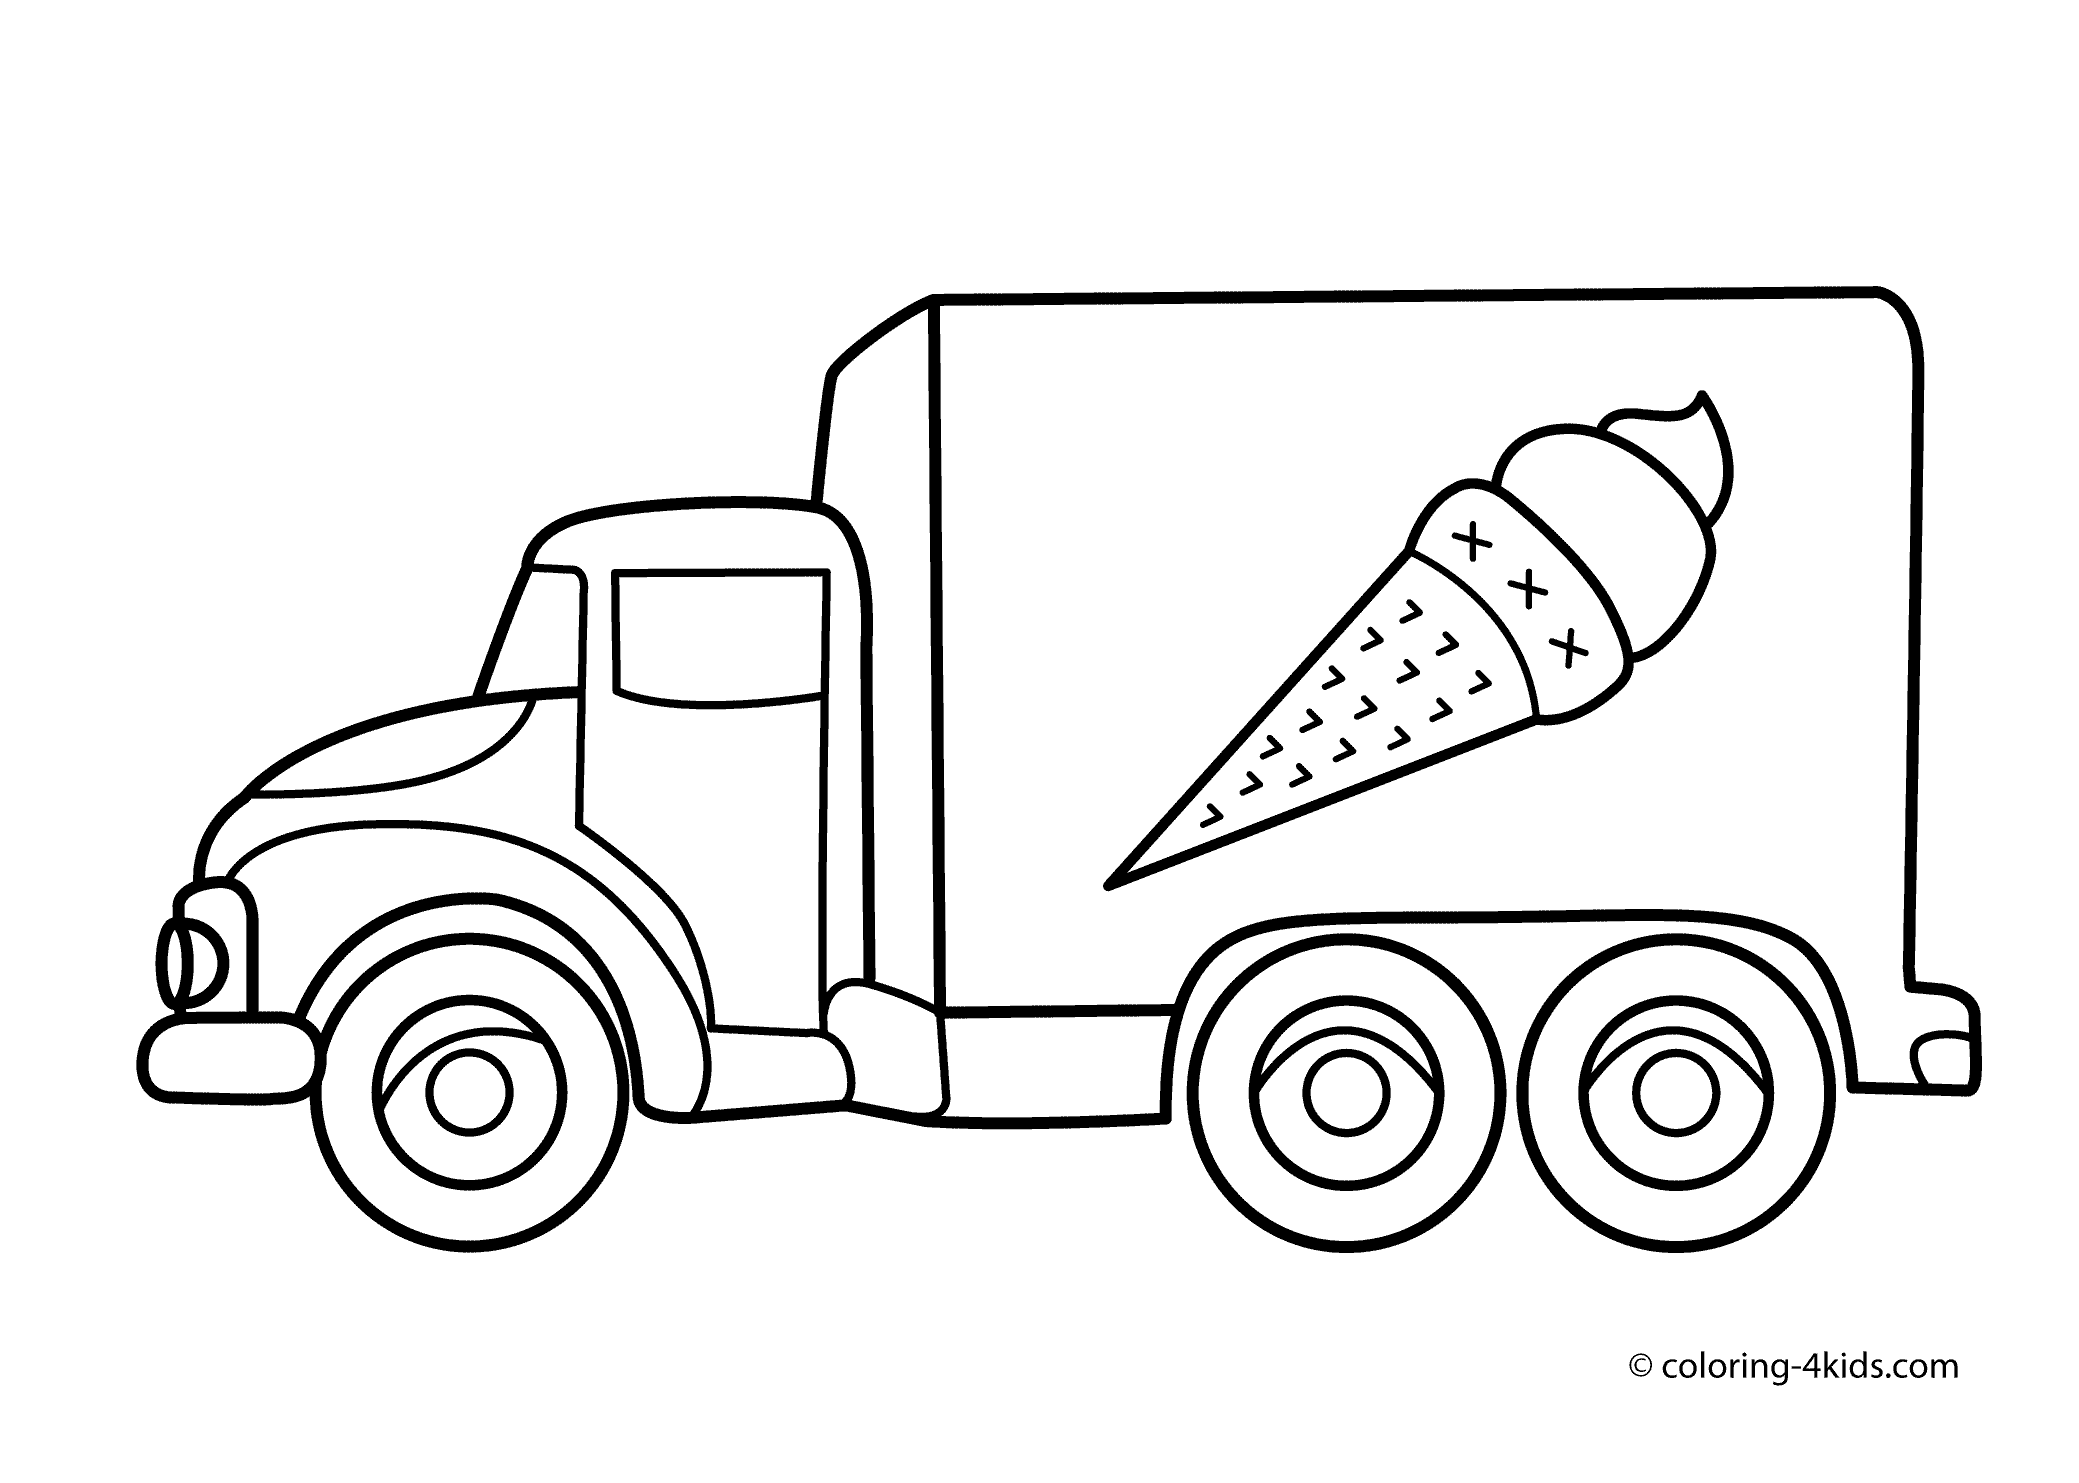 Cartoon Truck Coloring Pages For Kids for Adult